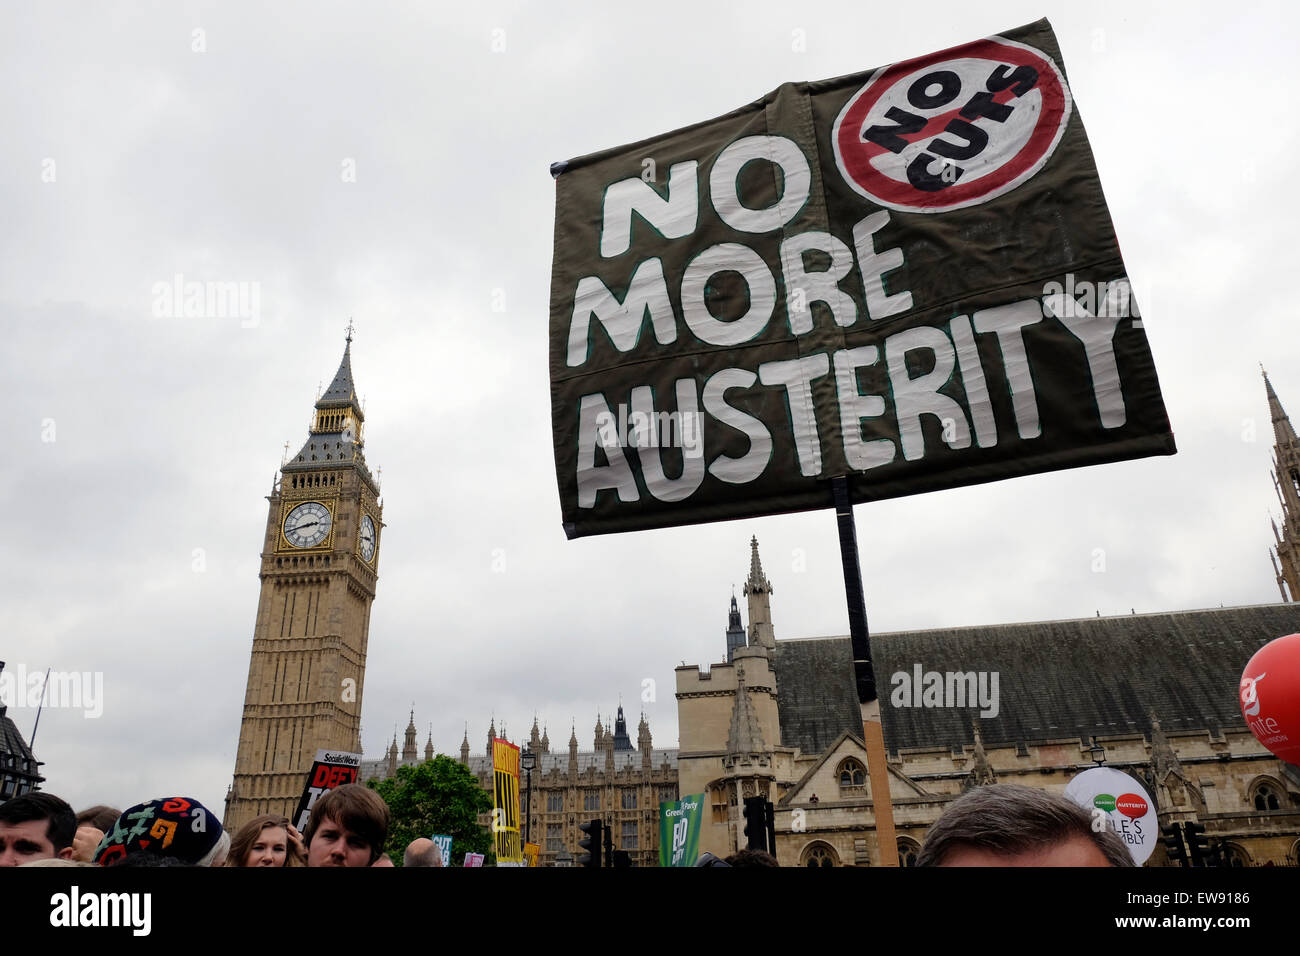 A banner reading ' No more austerity' Parliament Square, London Stock Photo